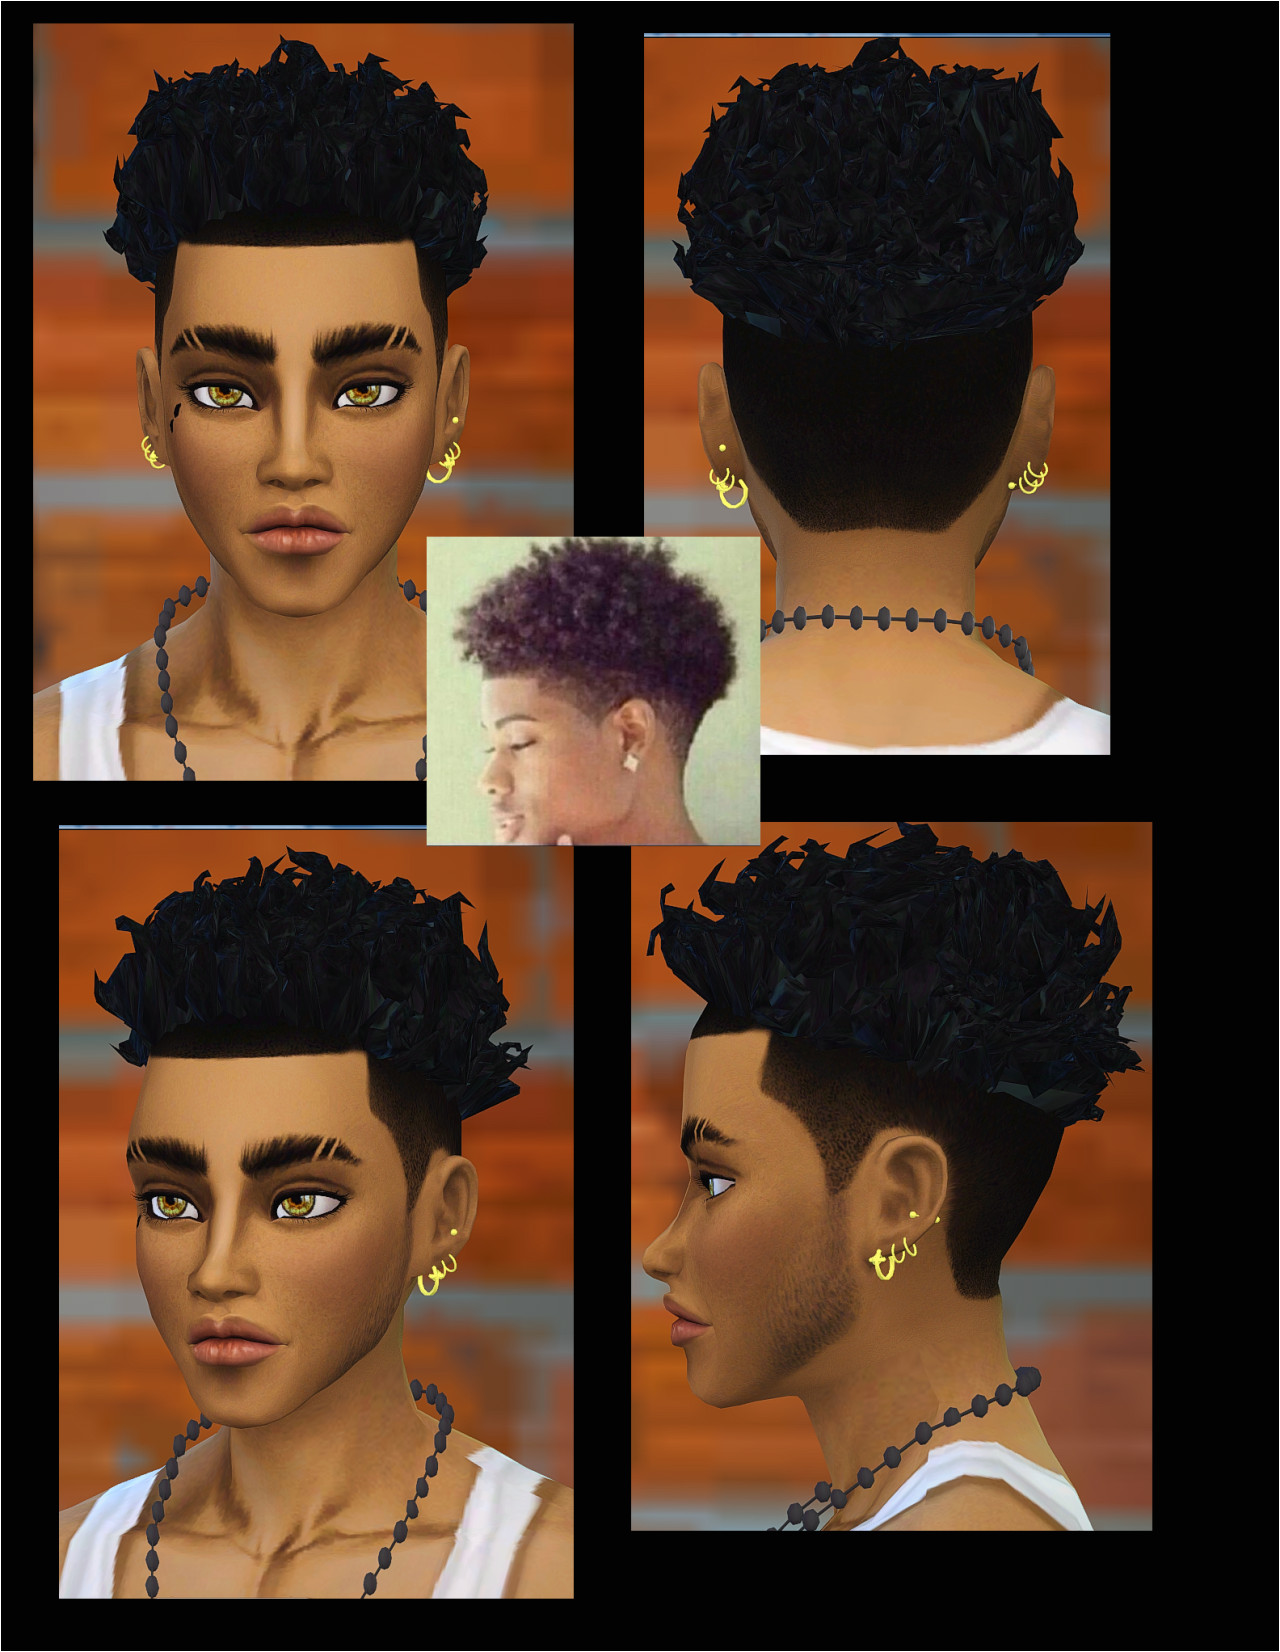 blvck life simz “ bebebrillits4cc “ SIMS 4 CURLY HAIR another curly hair requested i used this hairstyle by Kiara as a basick mesh IM TAKING REQUEST S